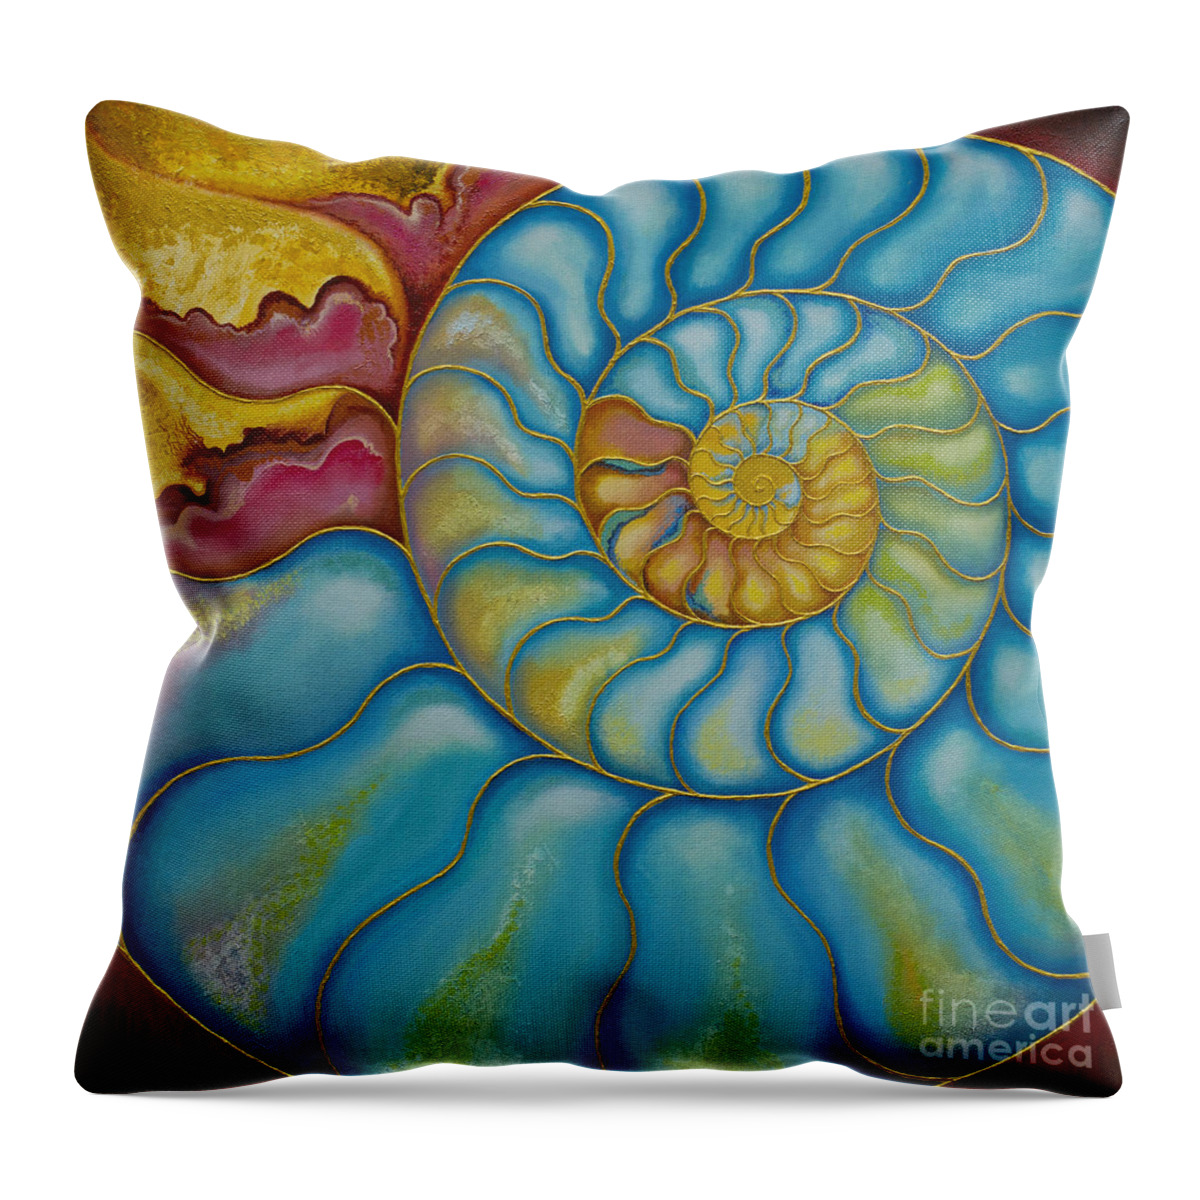 Sea Throw Pillow featuring the painting Eternity by Yuliya Glavnaya